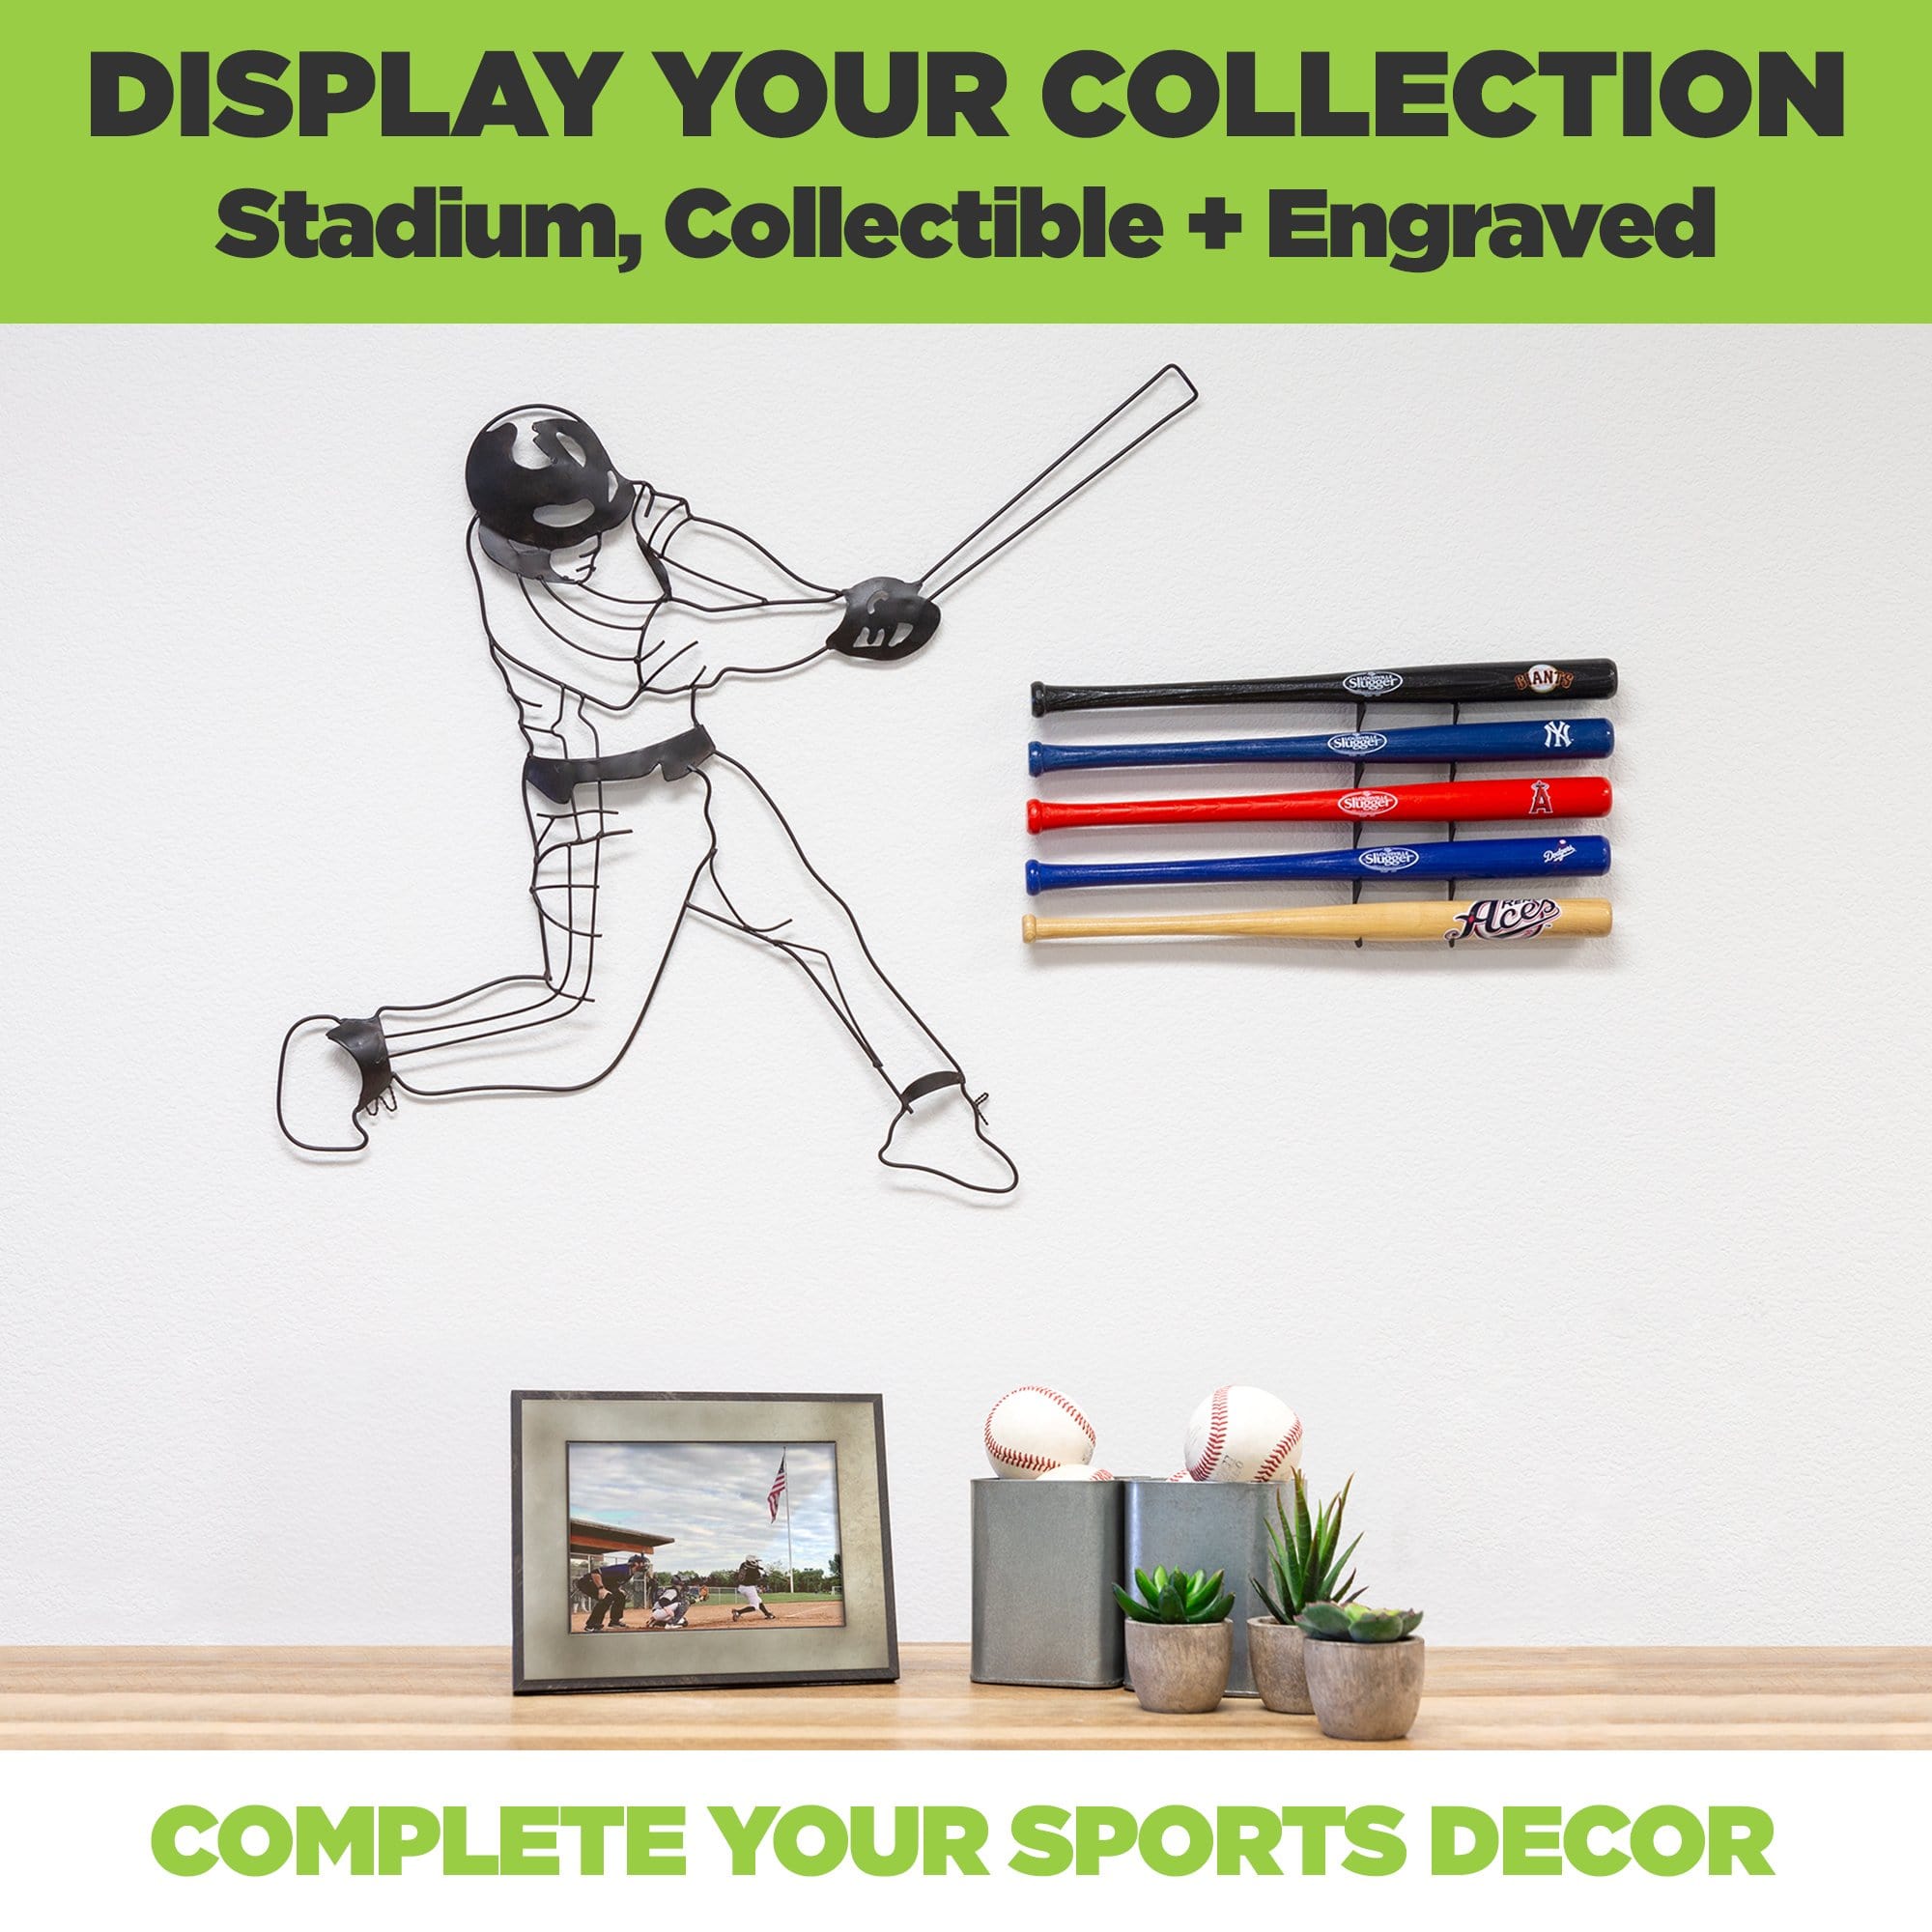 Zoomed out view of sports room decor with the HIDEit Mini Bat Display Mount. 5 Mini bats are shown mounted using the HIDEit Mini Bat Wall Mount.